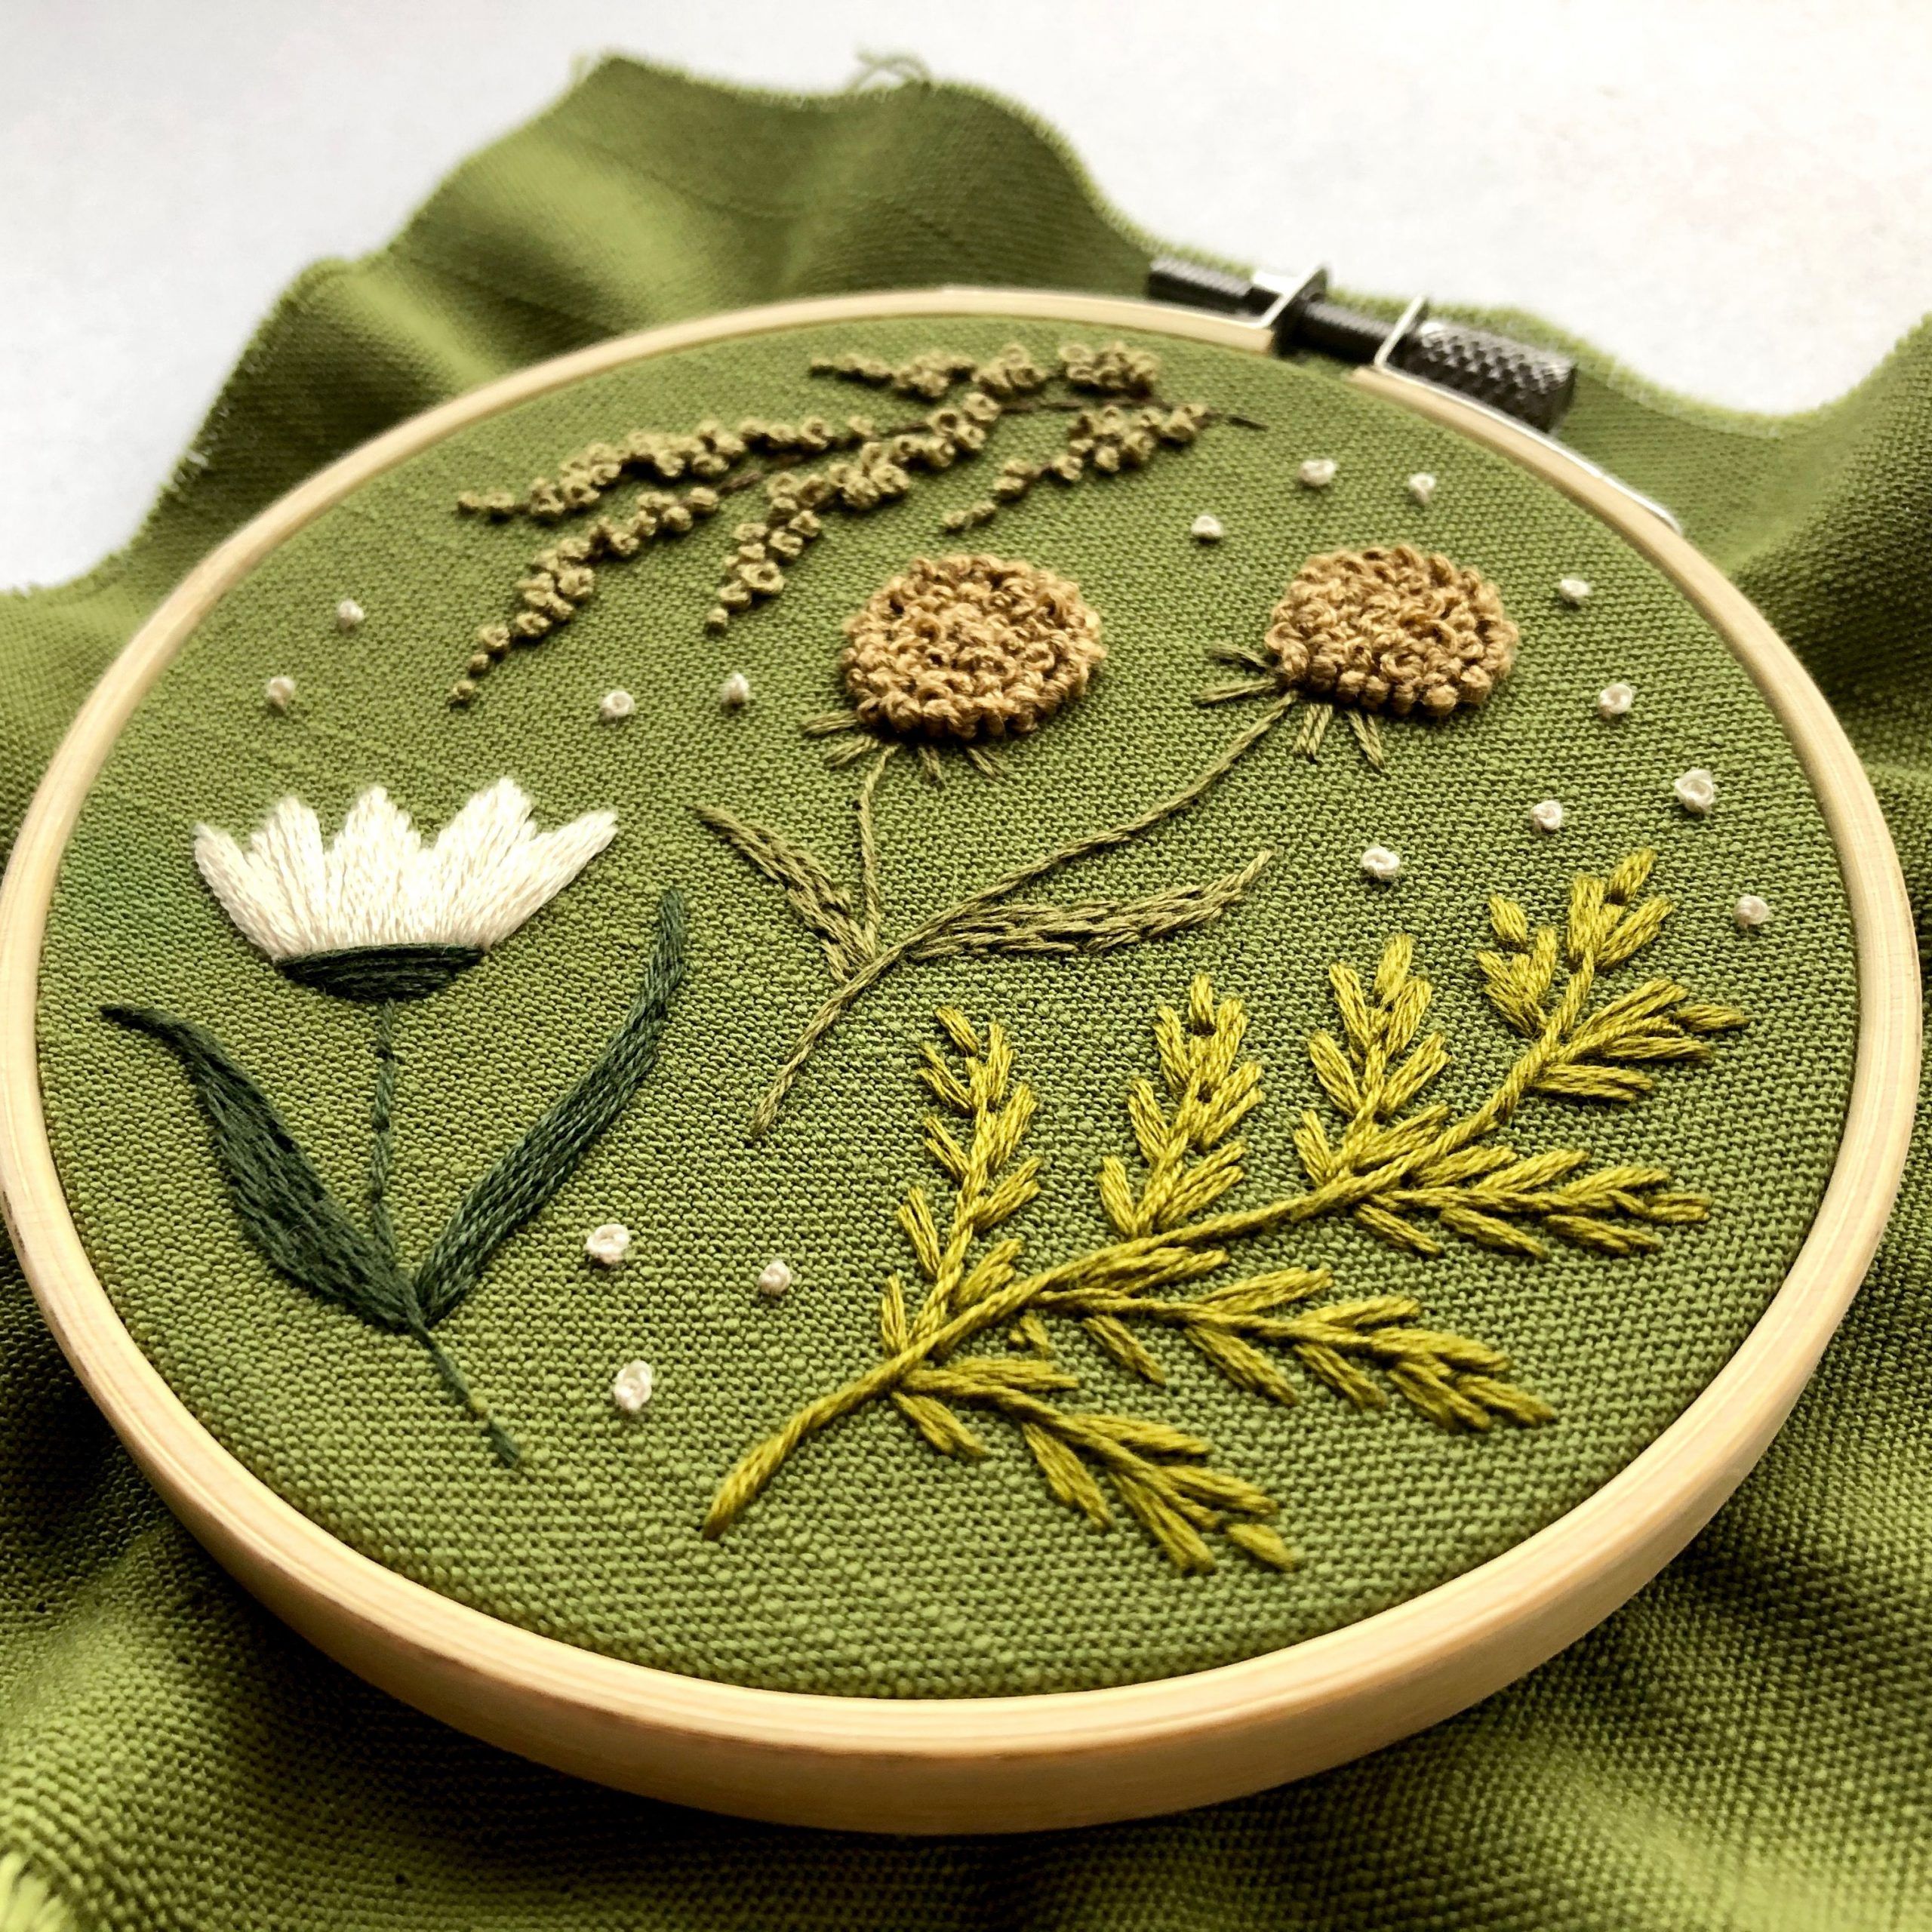 Botanical Hand Embroidery | Embroidery Hoop Art, Unique Within Most Popular Blended Fabric Old Rugged Cross Wall Hangings (Gallery 20 of 20)